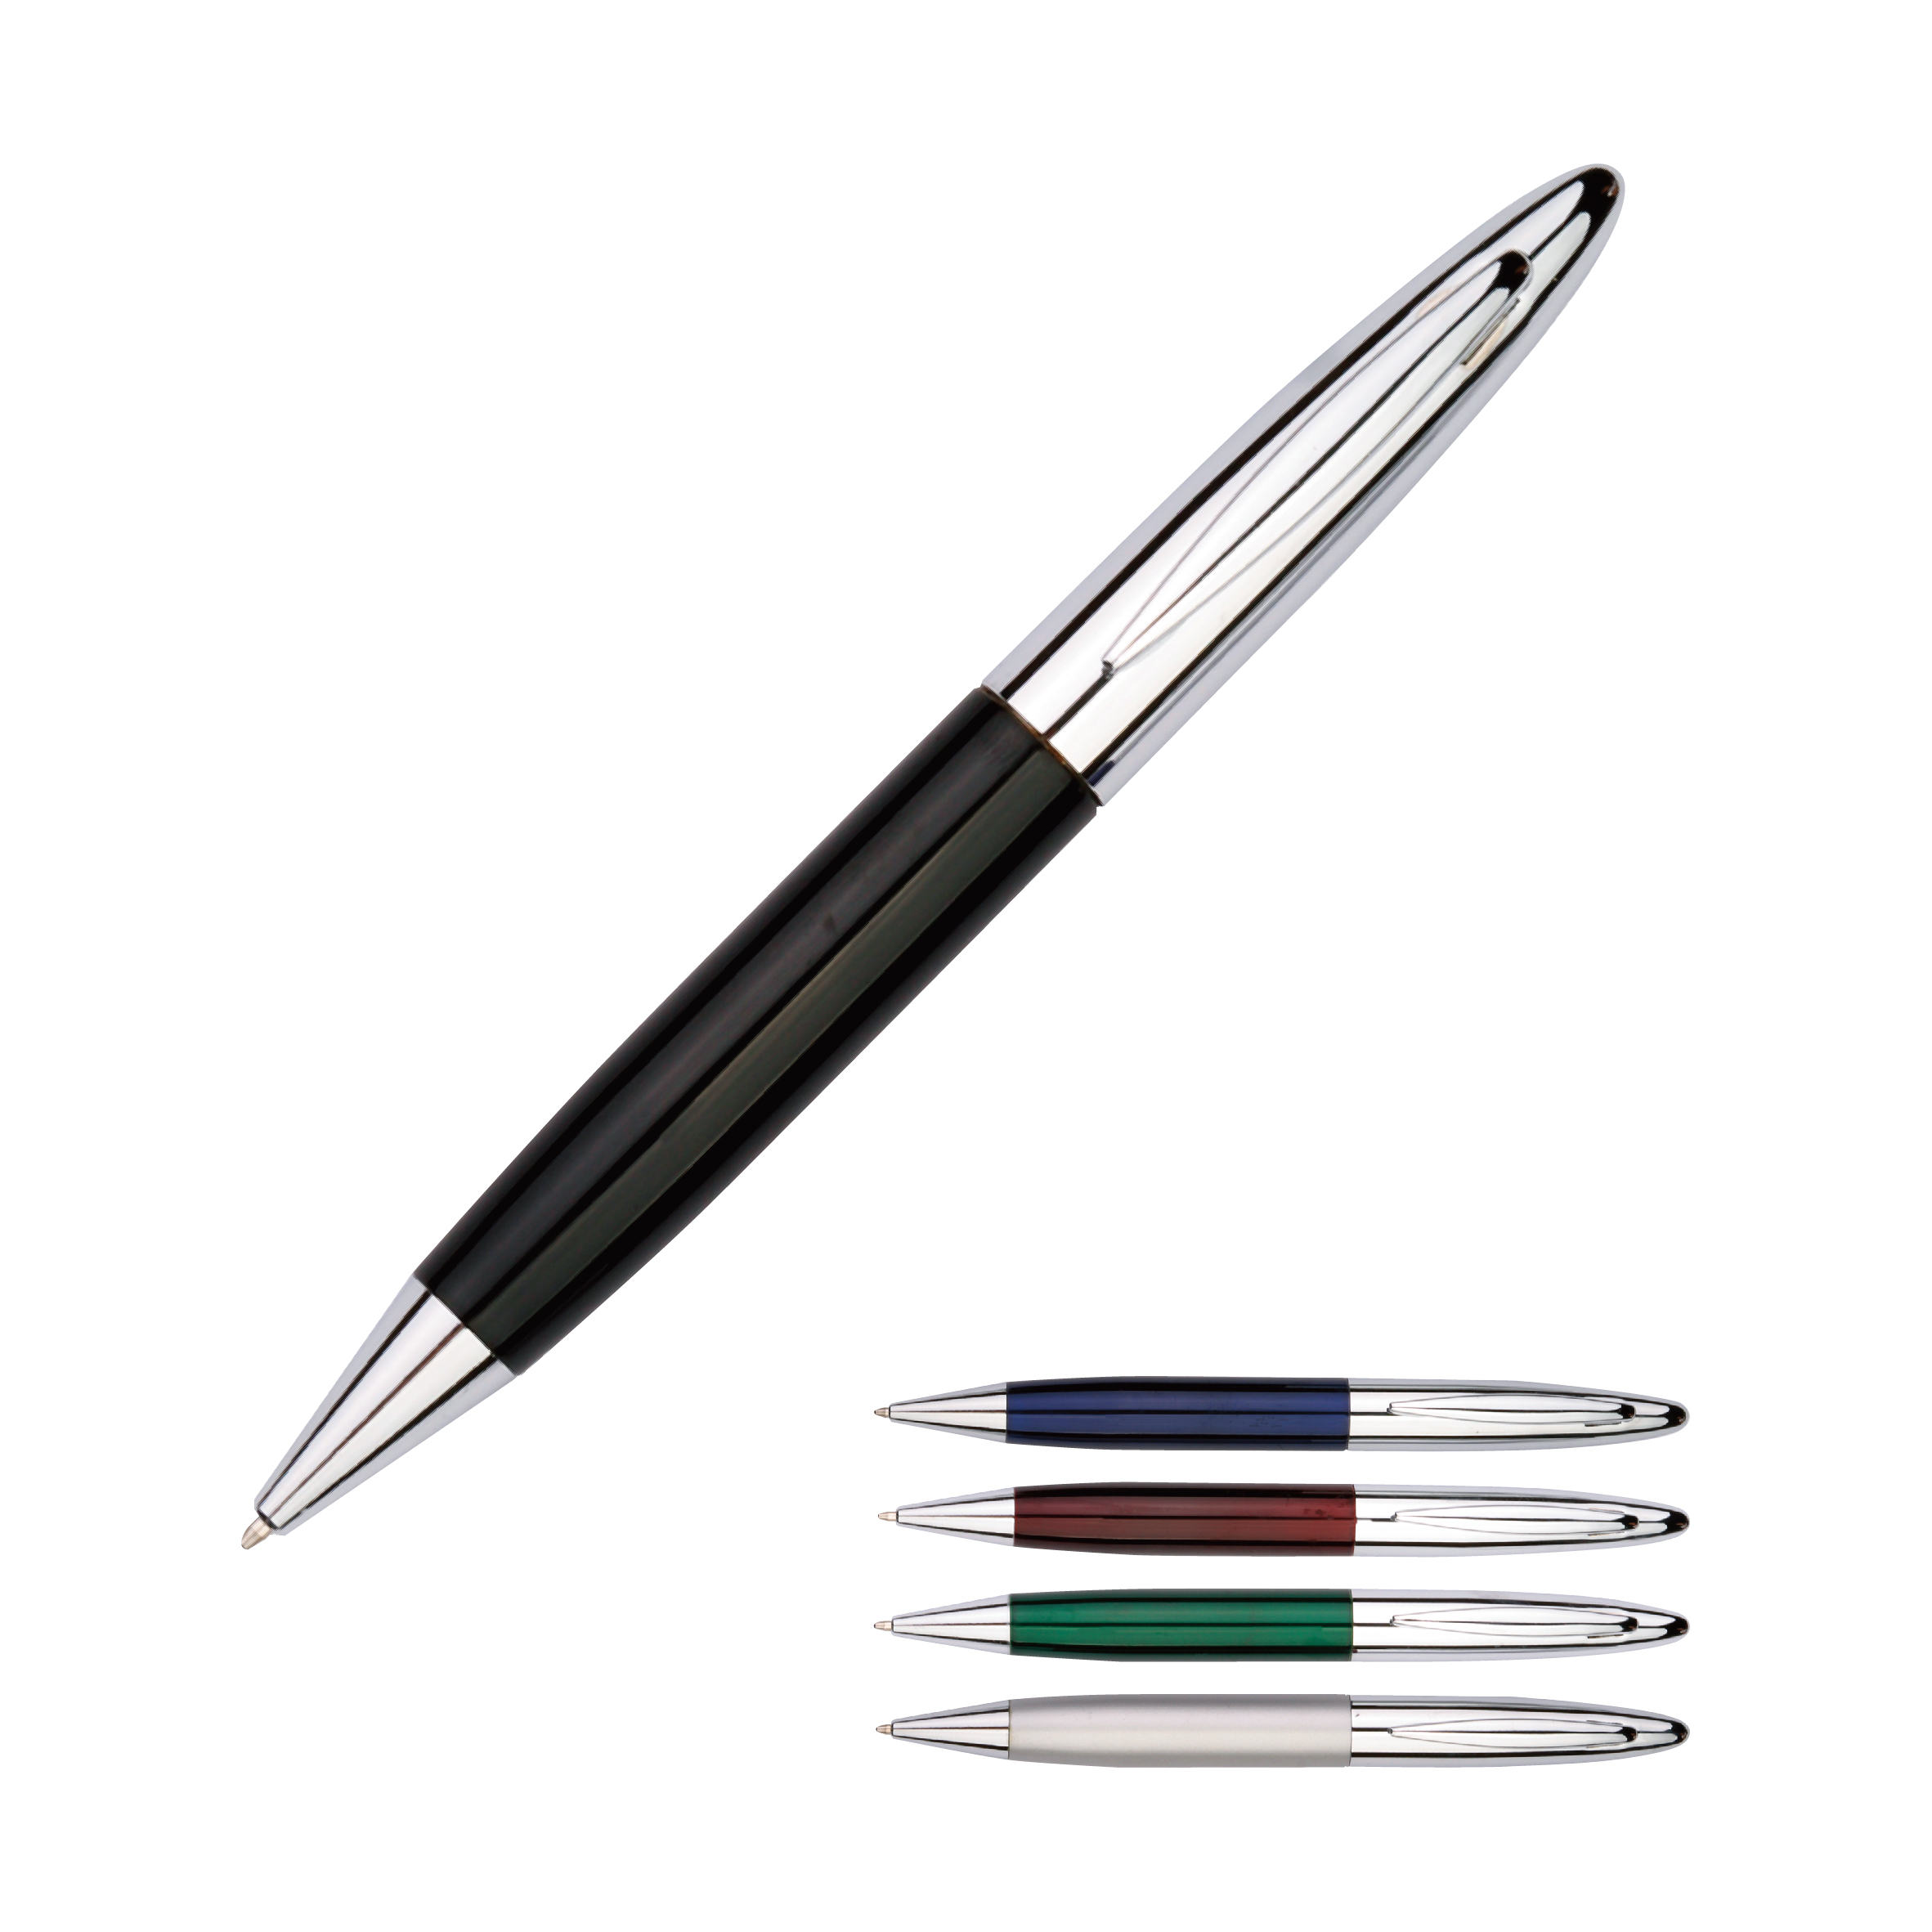 China Metal Ball Point Pen Manufacturers and Factory, Suppliers